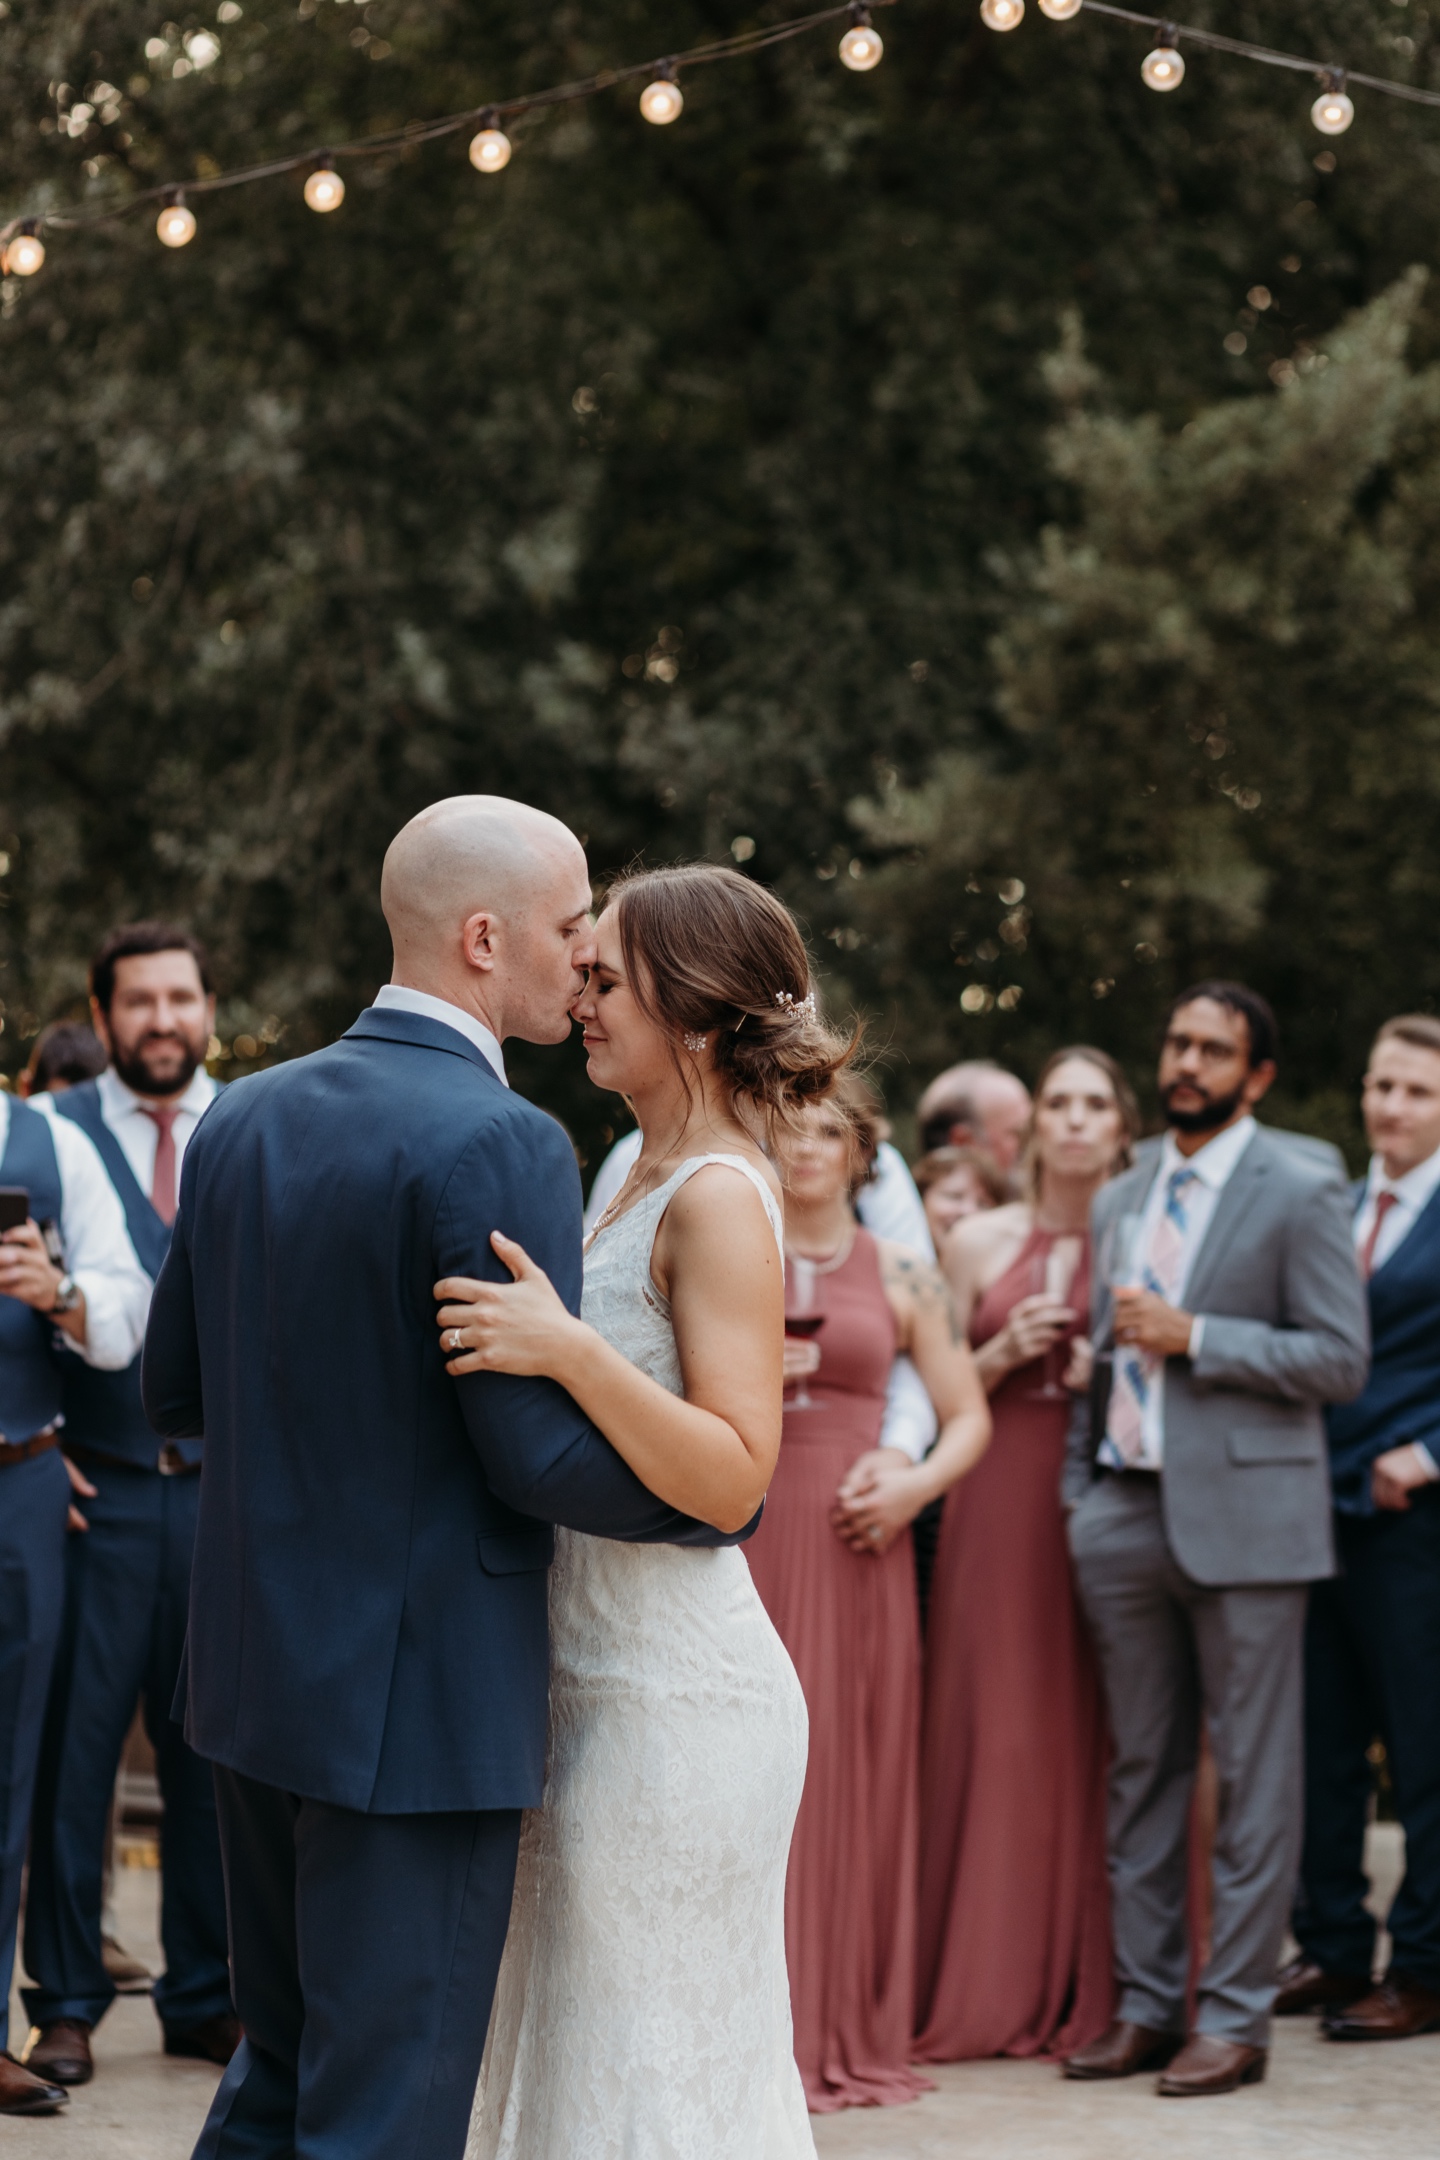 Groom kisses bride's forehead during their first dance at their wedding reception at Julietta winery in Sacramento, California.